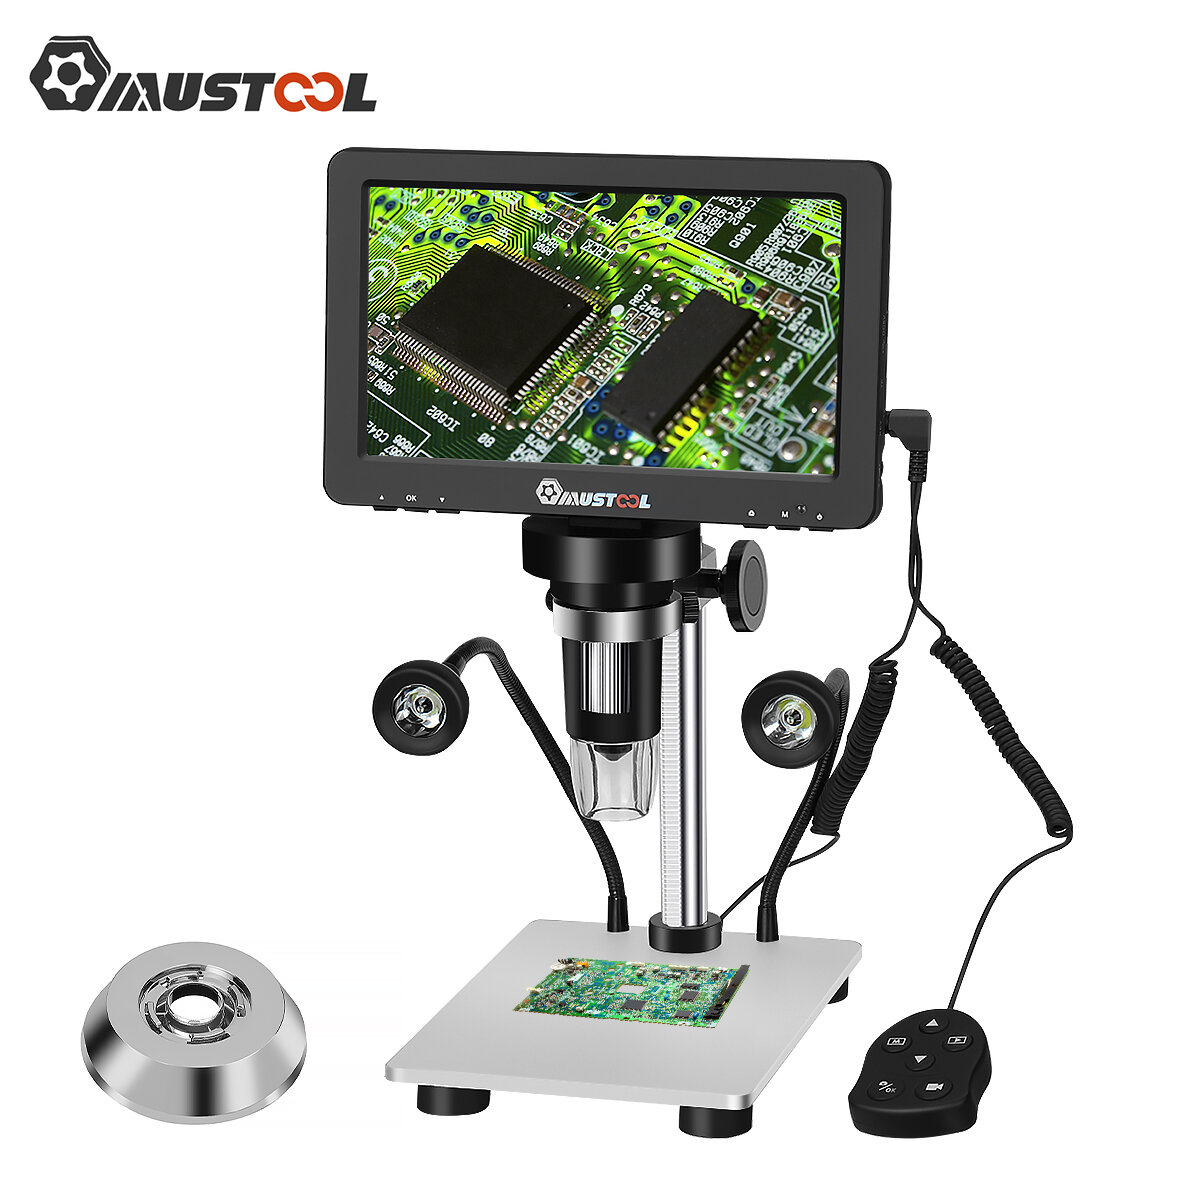 Image of Mustool DM9 Digital Microscope 7-inch 1200X Magnifying w/Reflect cover High Resolution 1080FHD Video Adjustable LED Ligh